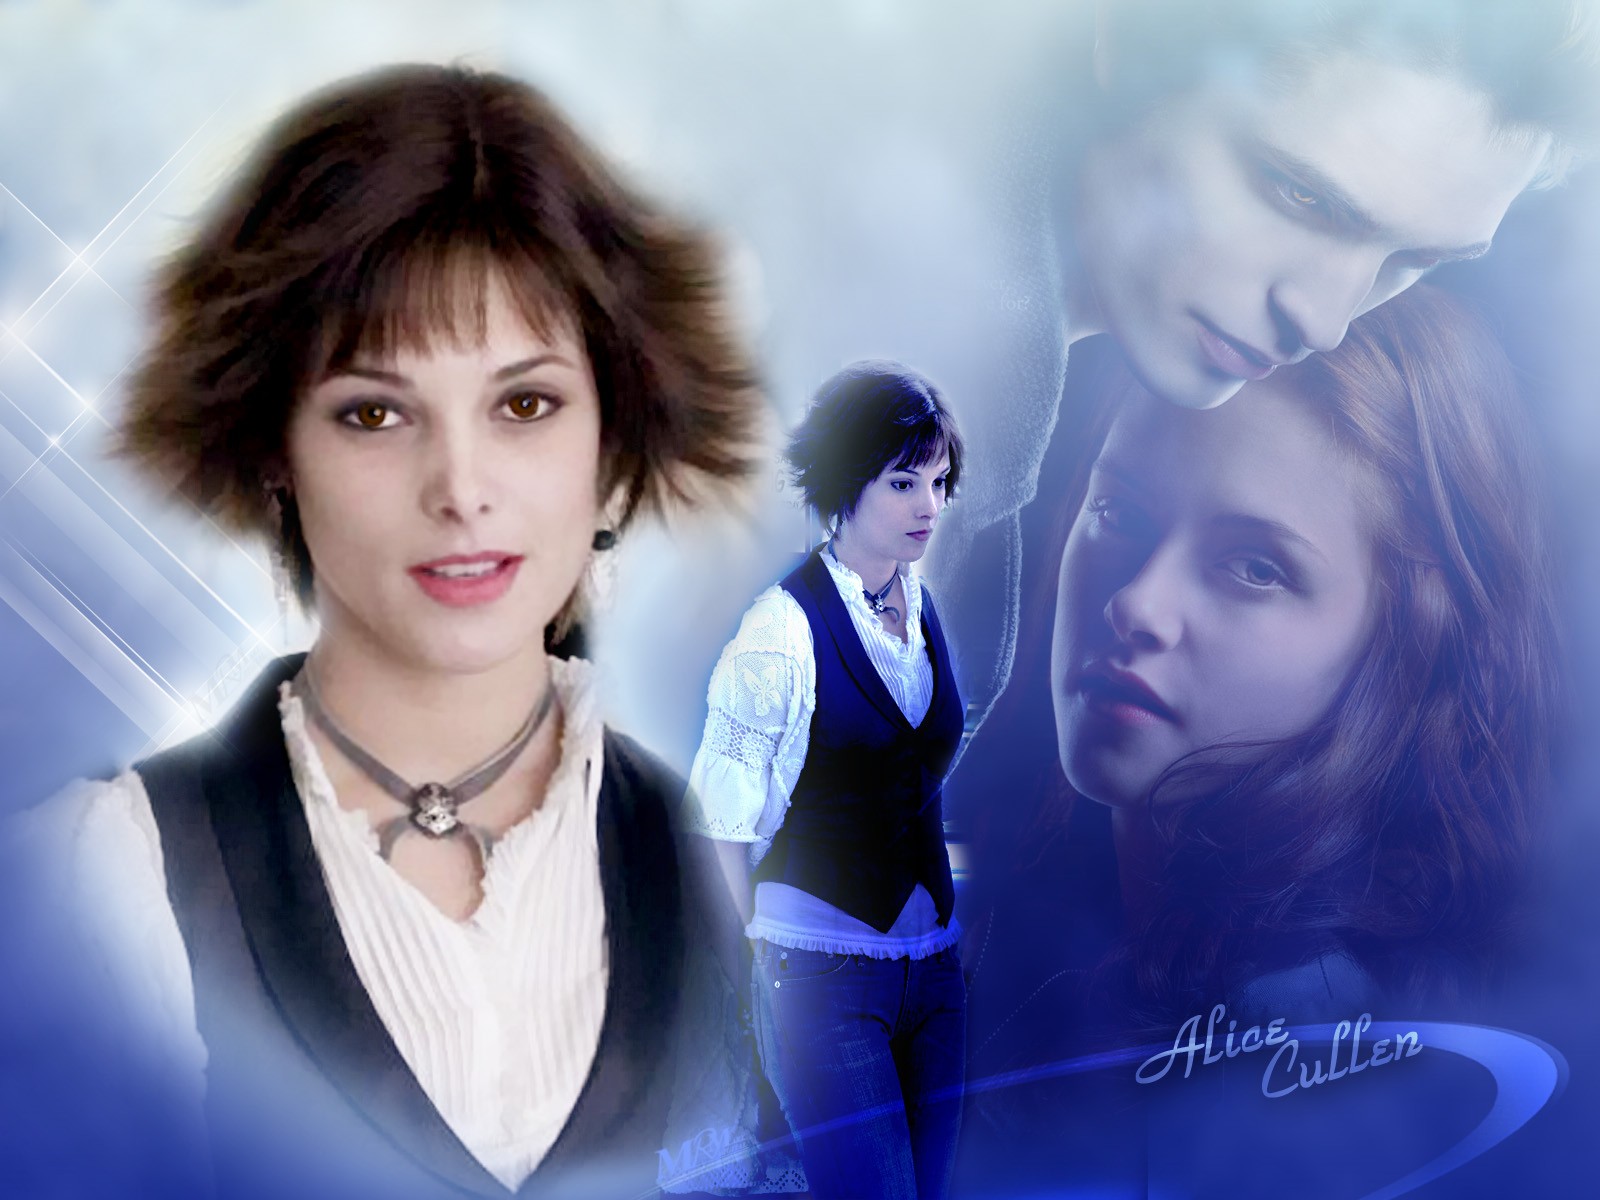 Wallpapers Hd Alice Cullen Crepsculo Todo Para Chicas - Drawing Edward And Bella Twilight , HD Wallpaper & Backgrounds